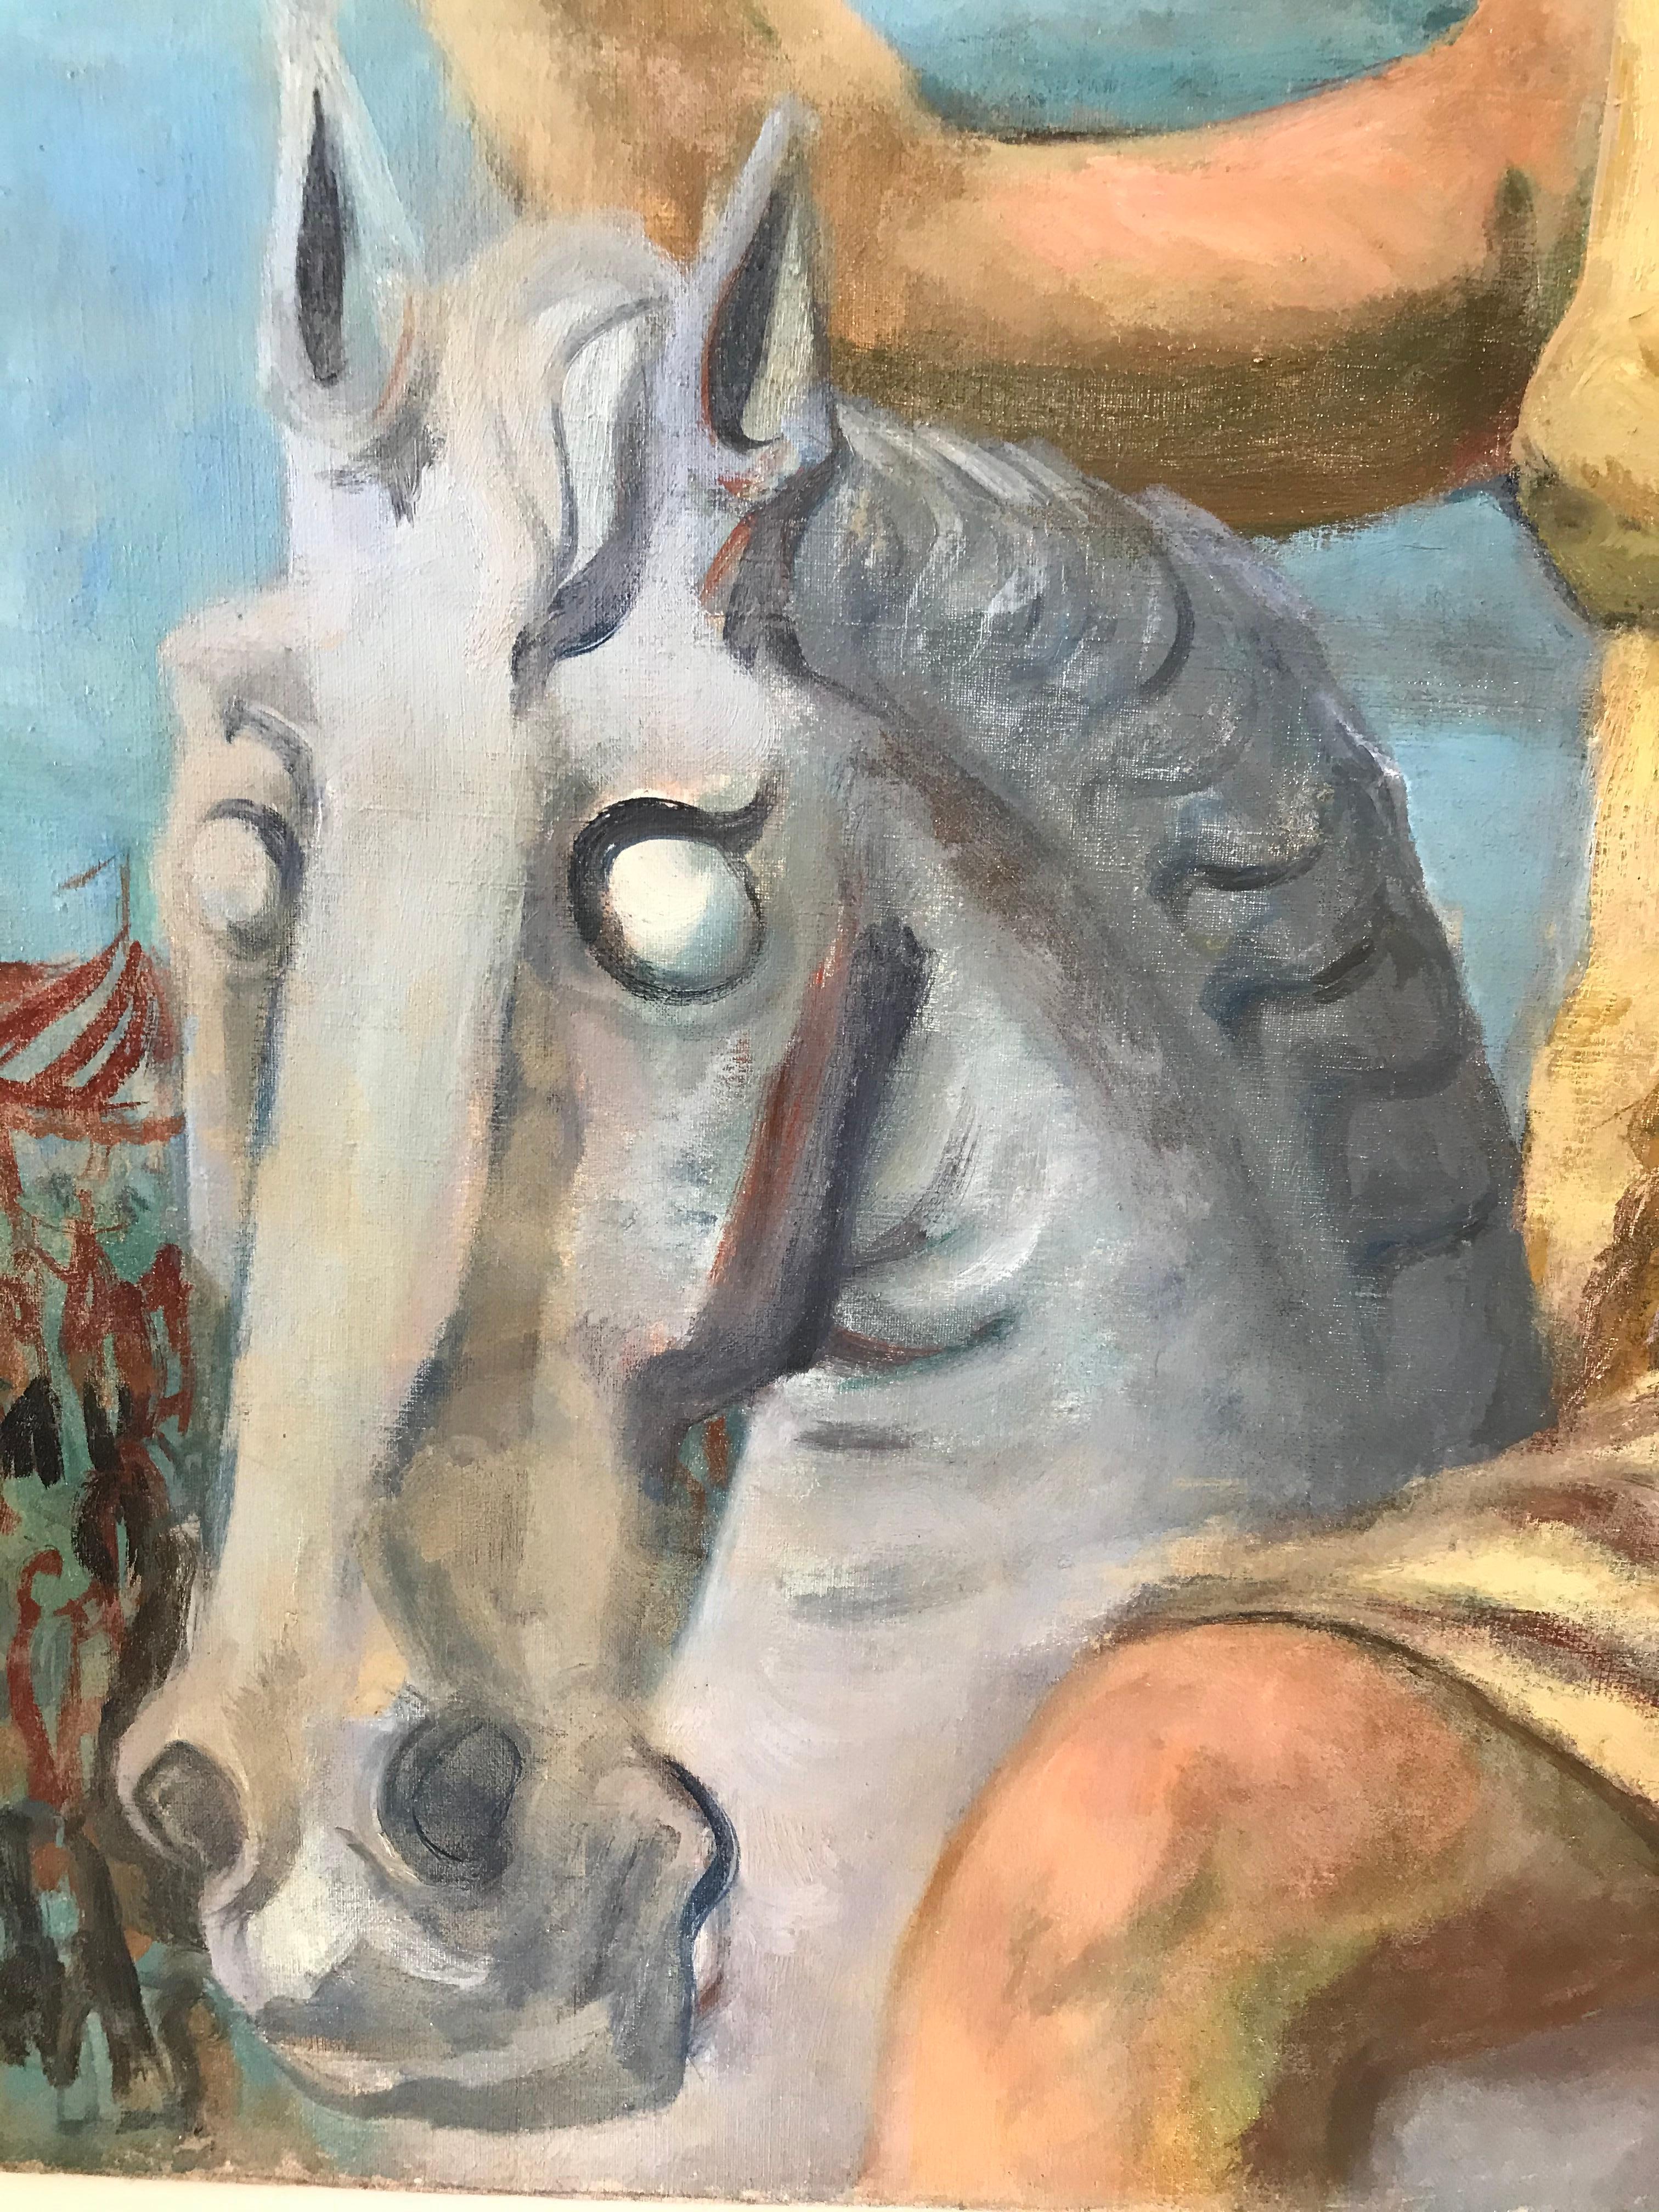 A painting of a woman riding on a carousel horse while holding out her white handkerchief to flow in the wind. 
This piece is reminiscent of a weekend at the fair or carnival, you can see a glimpse of the event in the beyond the carousel. 
Waving